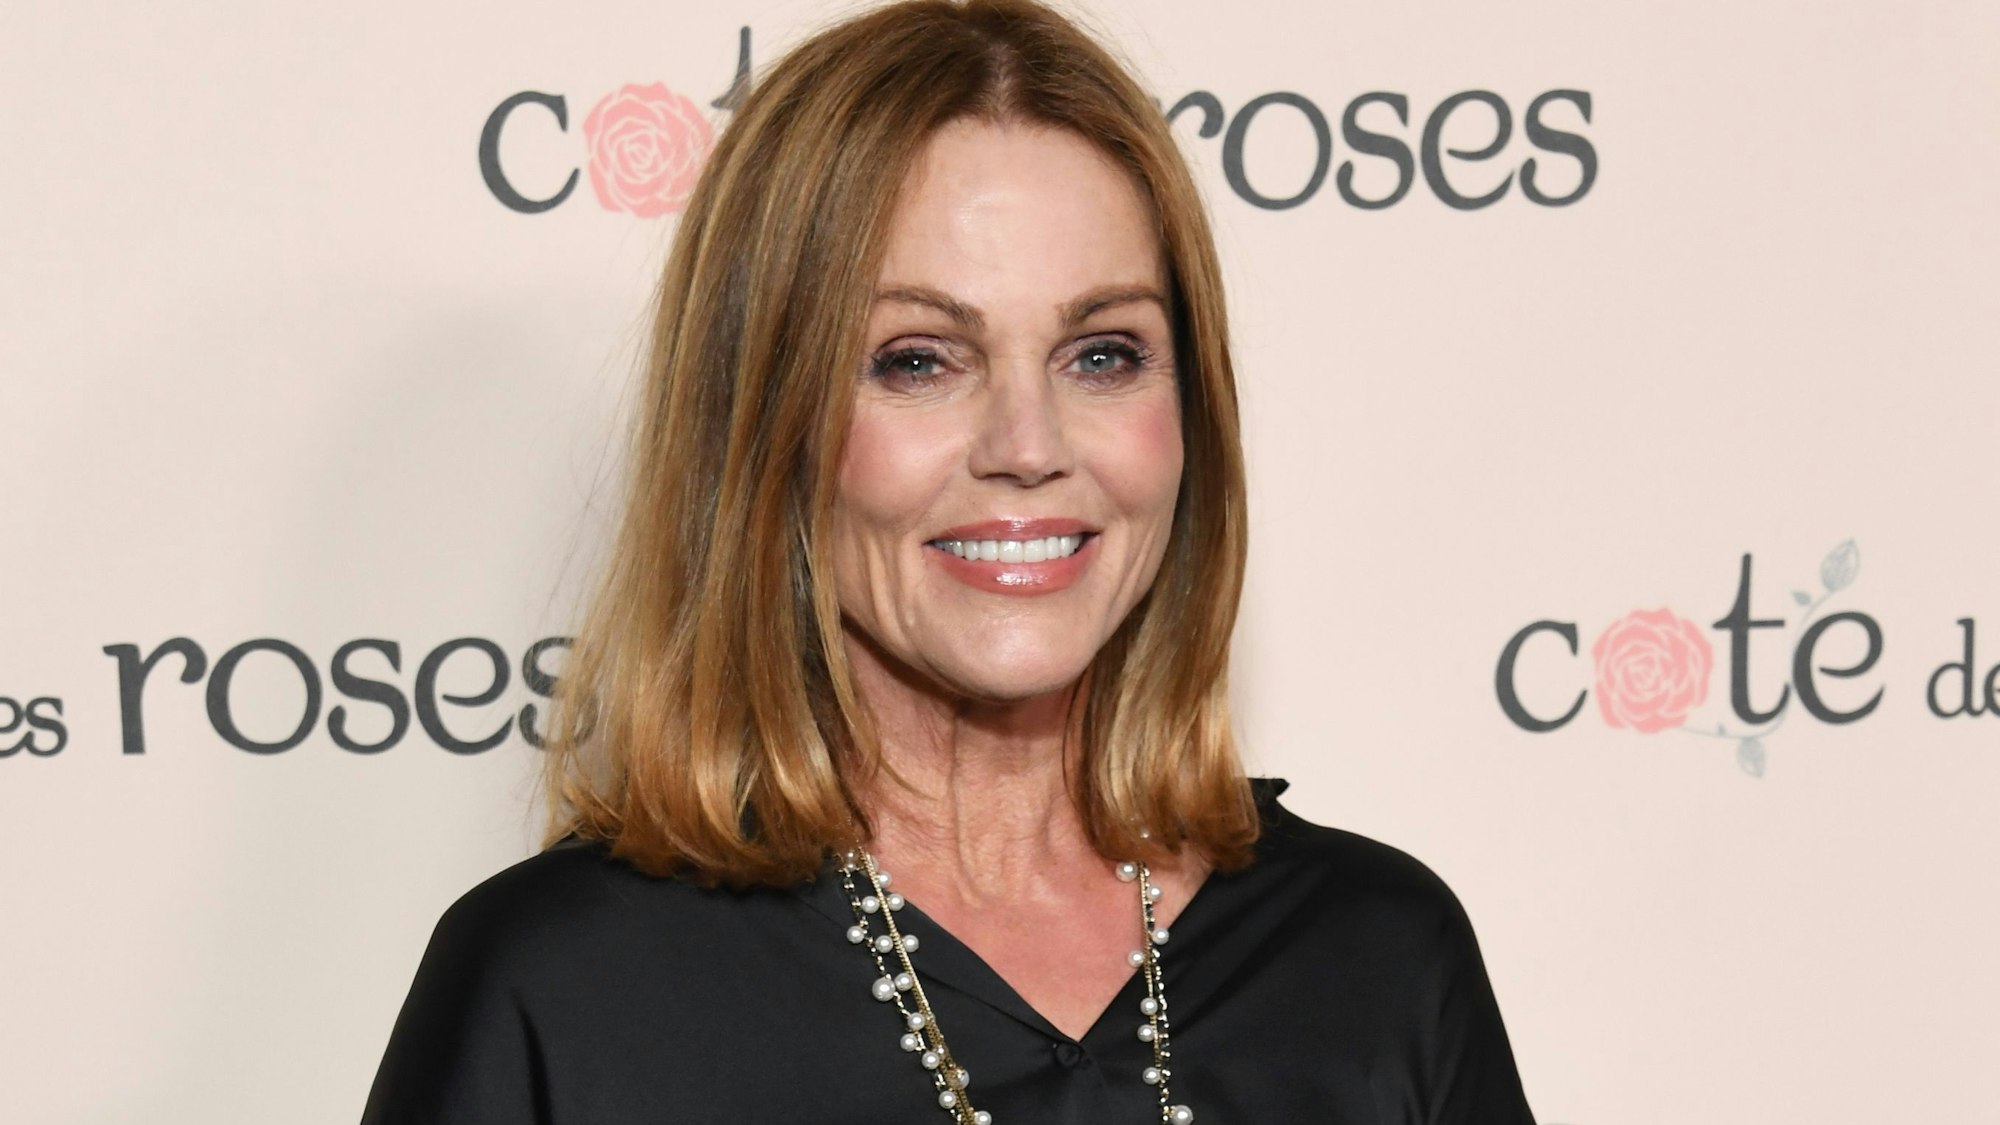 Belinda Carlisle besucht die Veranstaltung „Cote des Roses Reveals New Campaign Photographed By David LaChapelle And Starring Taylor Hill“ in den Milk Studios Los Angeles am 29. April 2022 in Los Angeles.